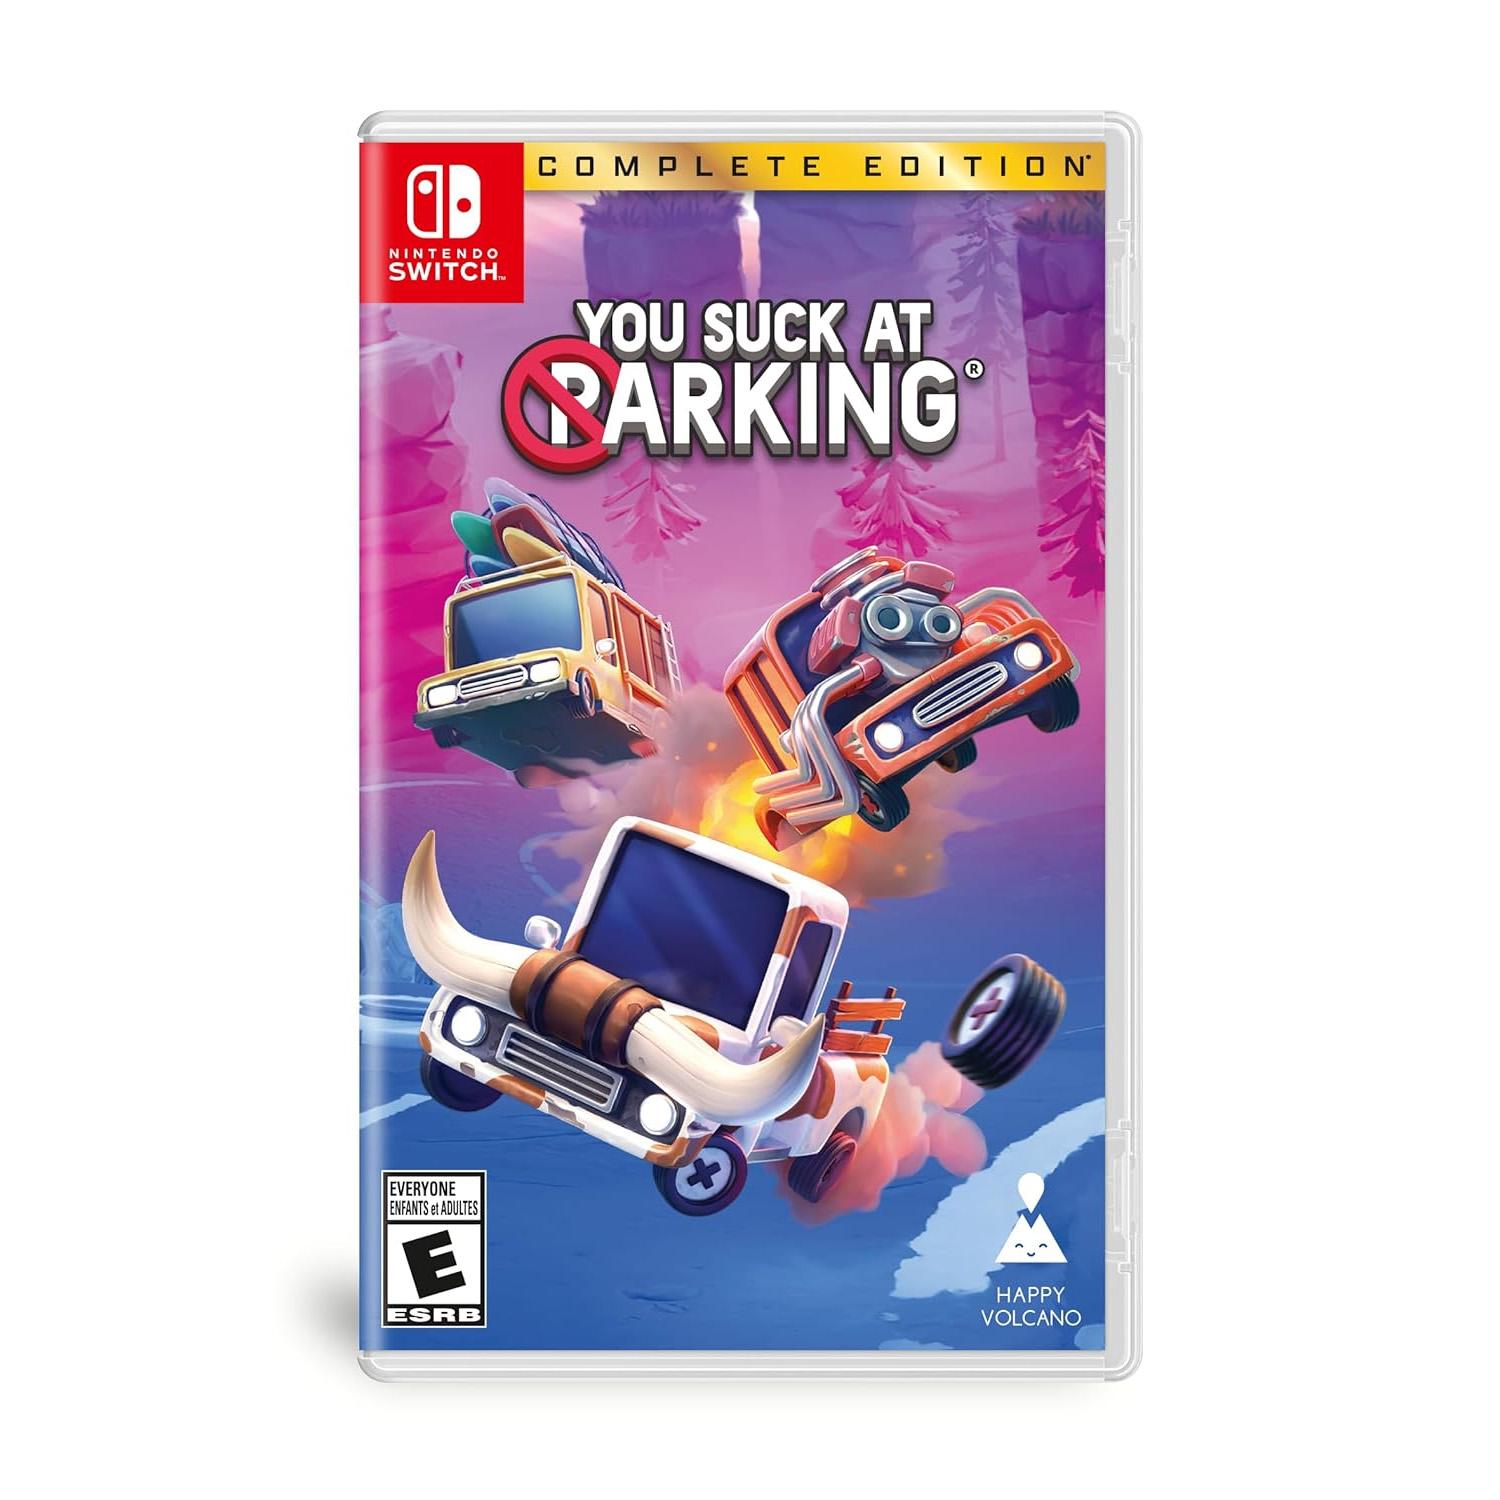 You Suck at Parking Complete Edition Nintendo Switch for $14.99